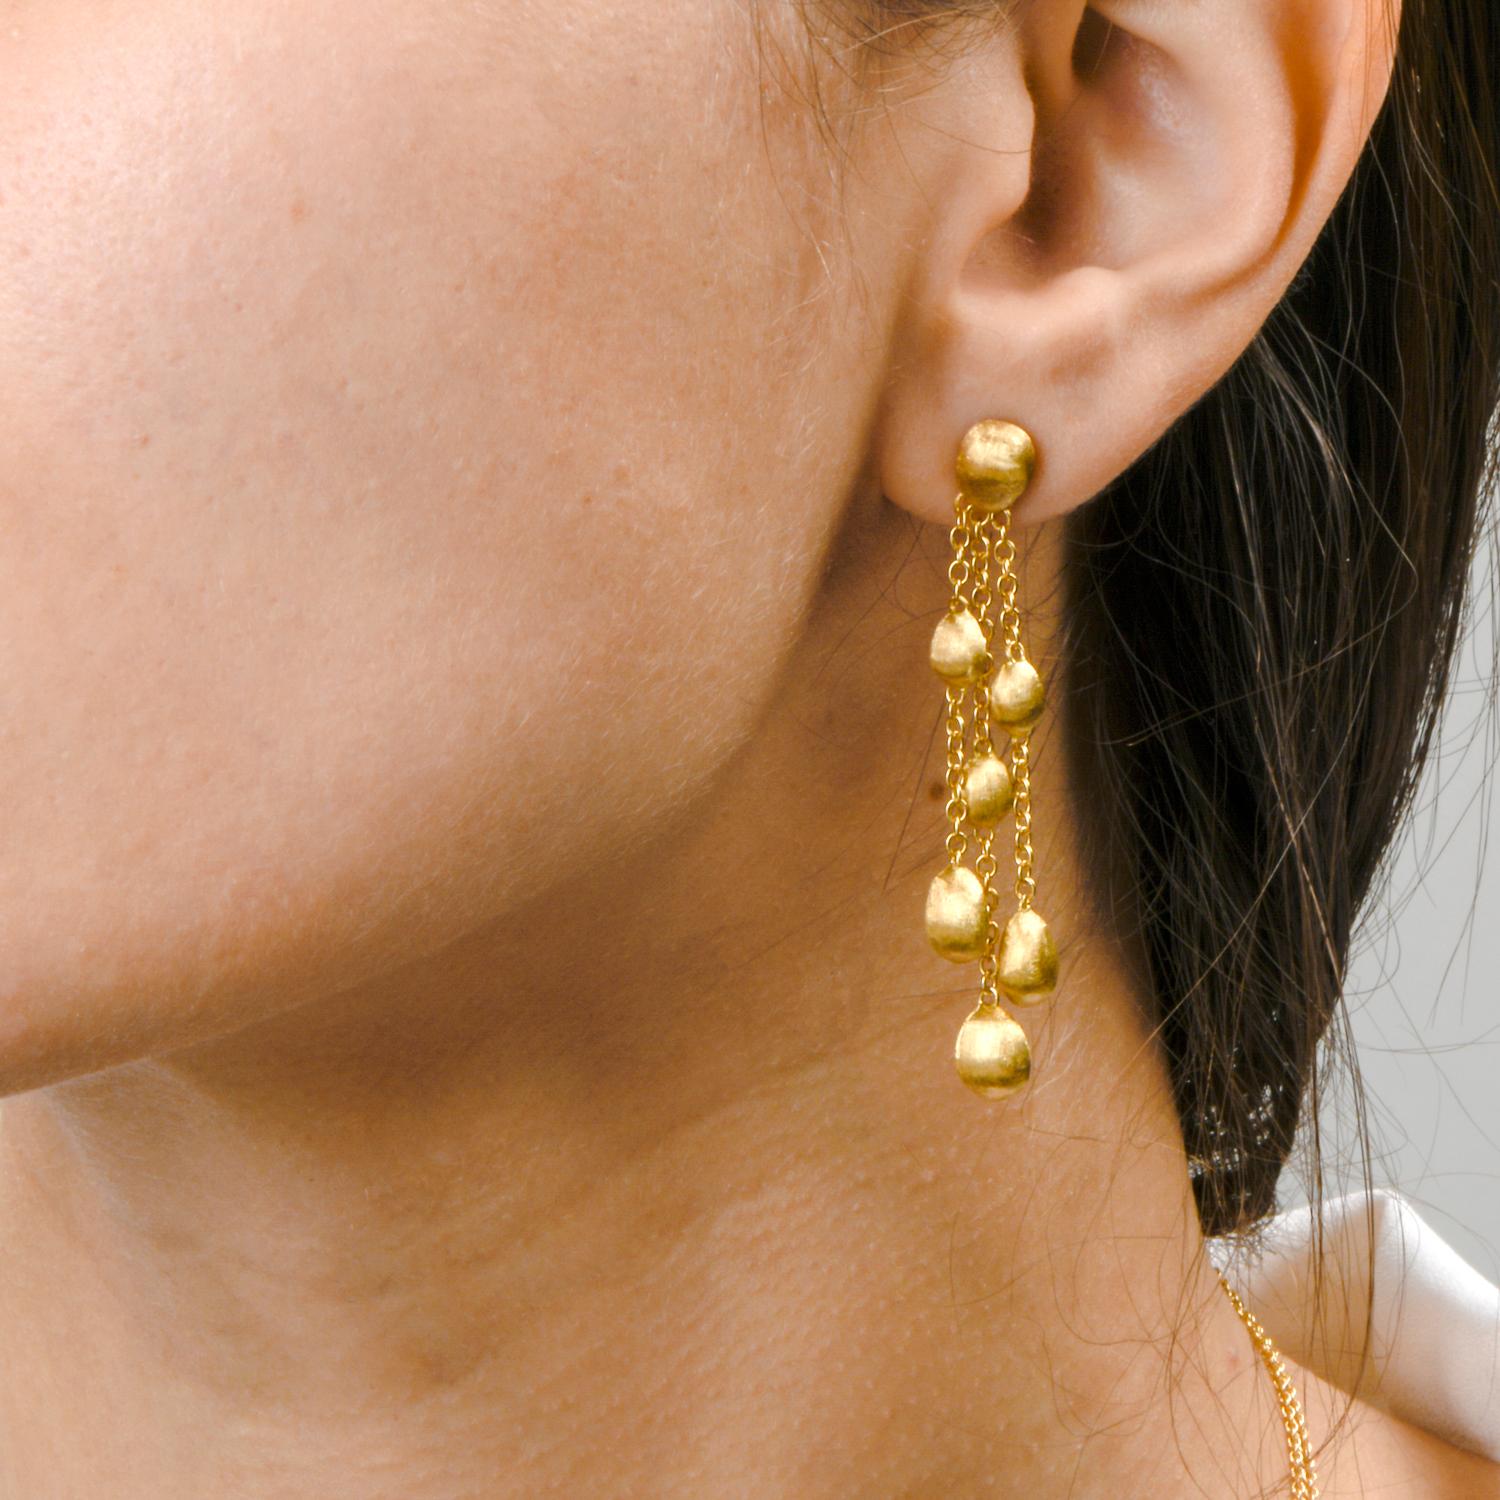 These beautiful earrings were created by Marco Bicego and 

crafted in 18K yellow gold.

Featuring 3 strands, each strand containing 2 

Bulino finished gold beads.

With every movement, there is motion.

Secured with Press on Friction